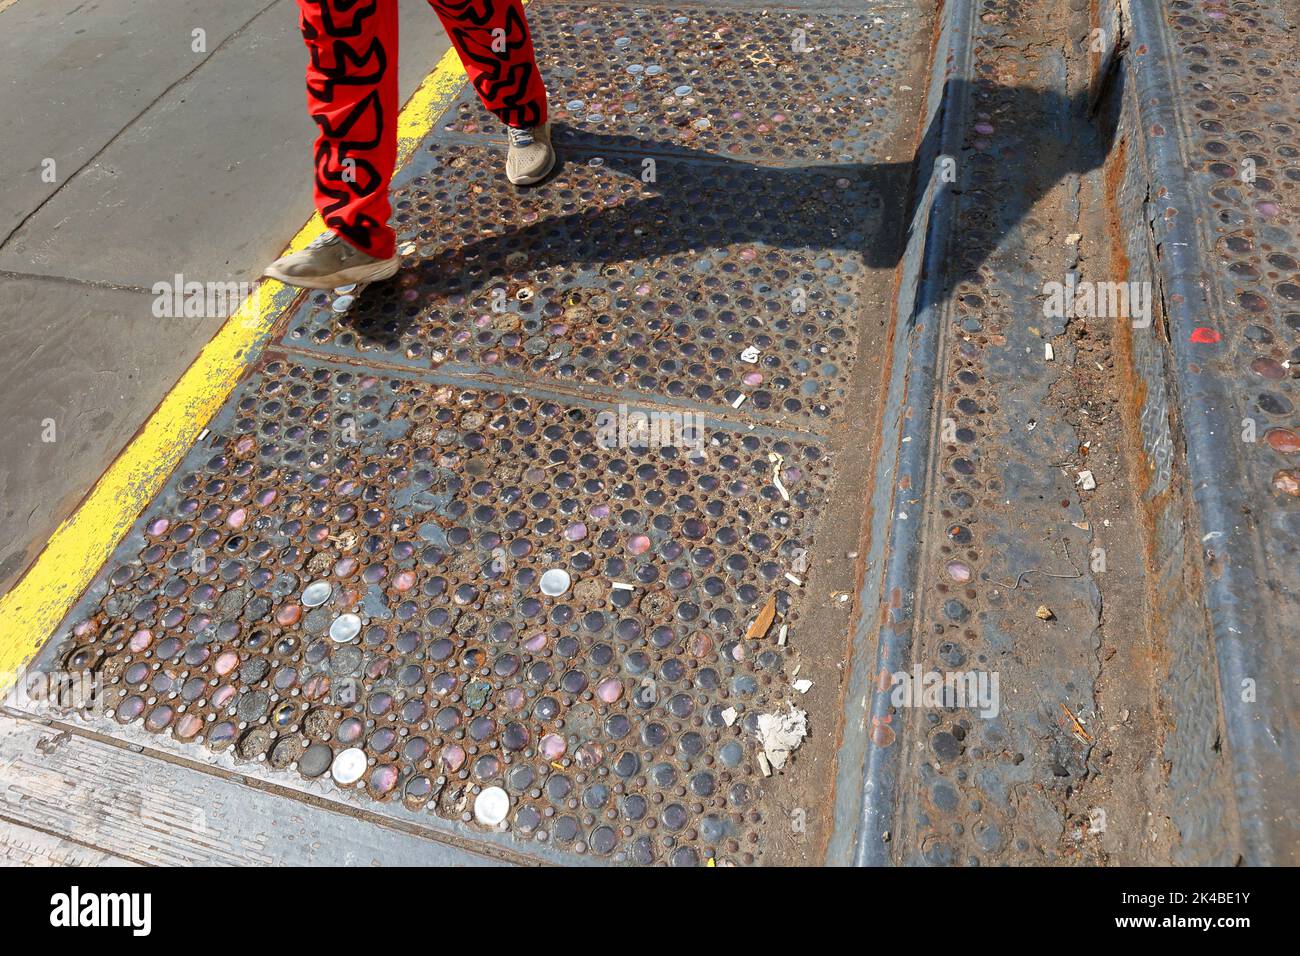 A person walks over an original New York City cast-iron sidewalk vault embedded with colorful glass beads located in Manhattan's SoHo neighborhood. Stock Photo